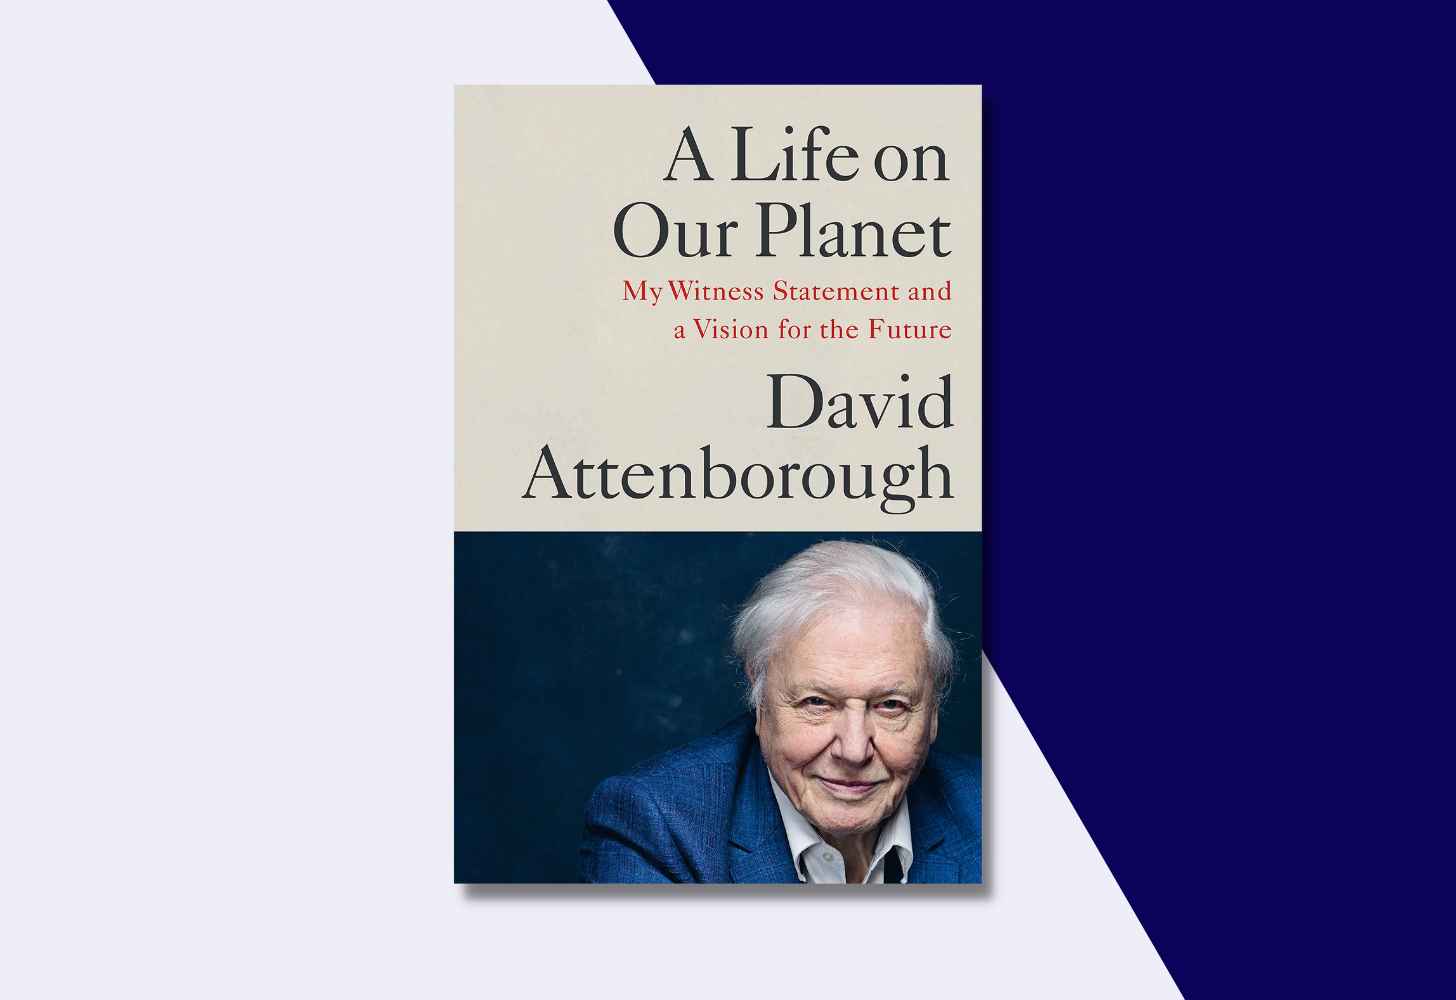 The Cover Of “A Life on Our Planet: My Witness Statement and a Vision for the Future” by David Attenborough